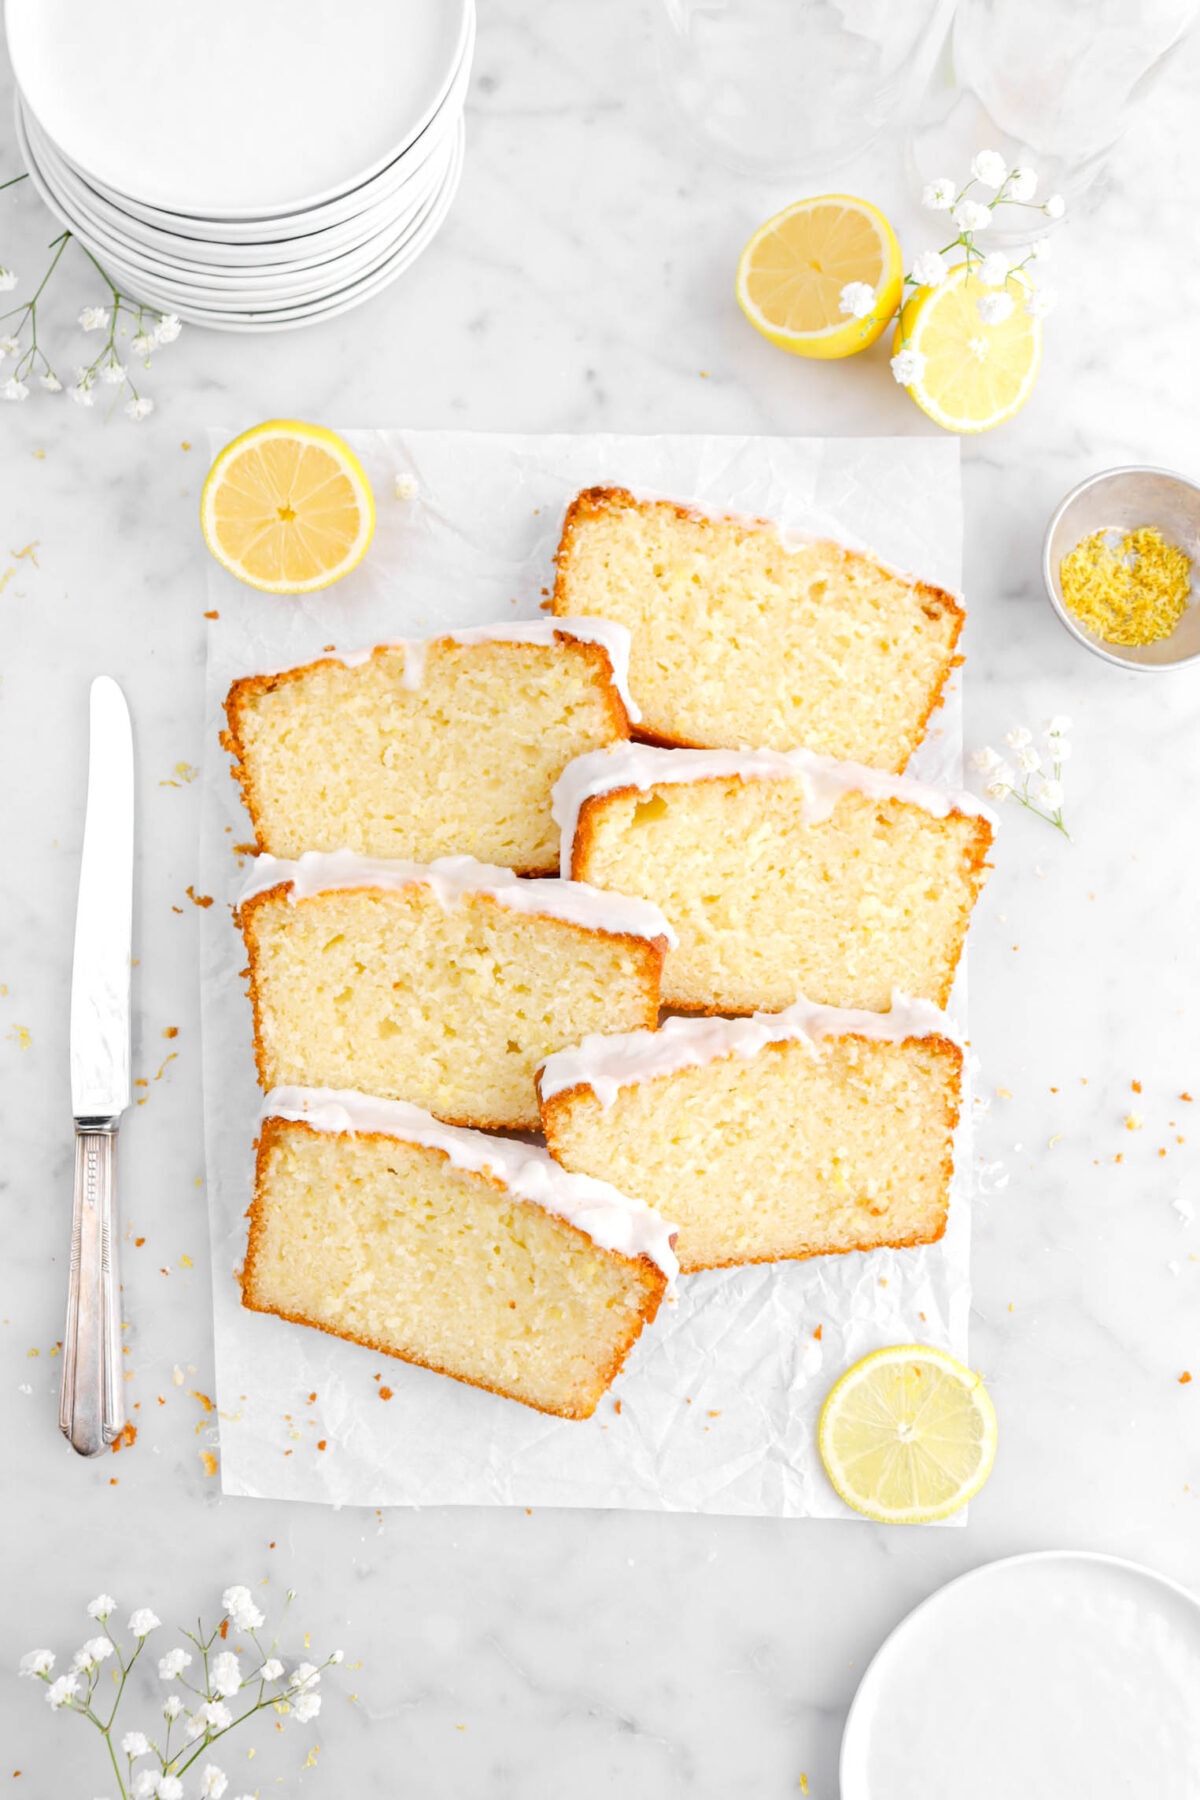 six slices of lemon loaf cake on parchment paper with flowers and lemons around.